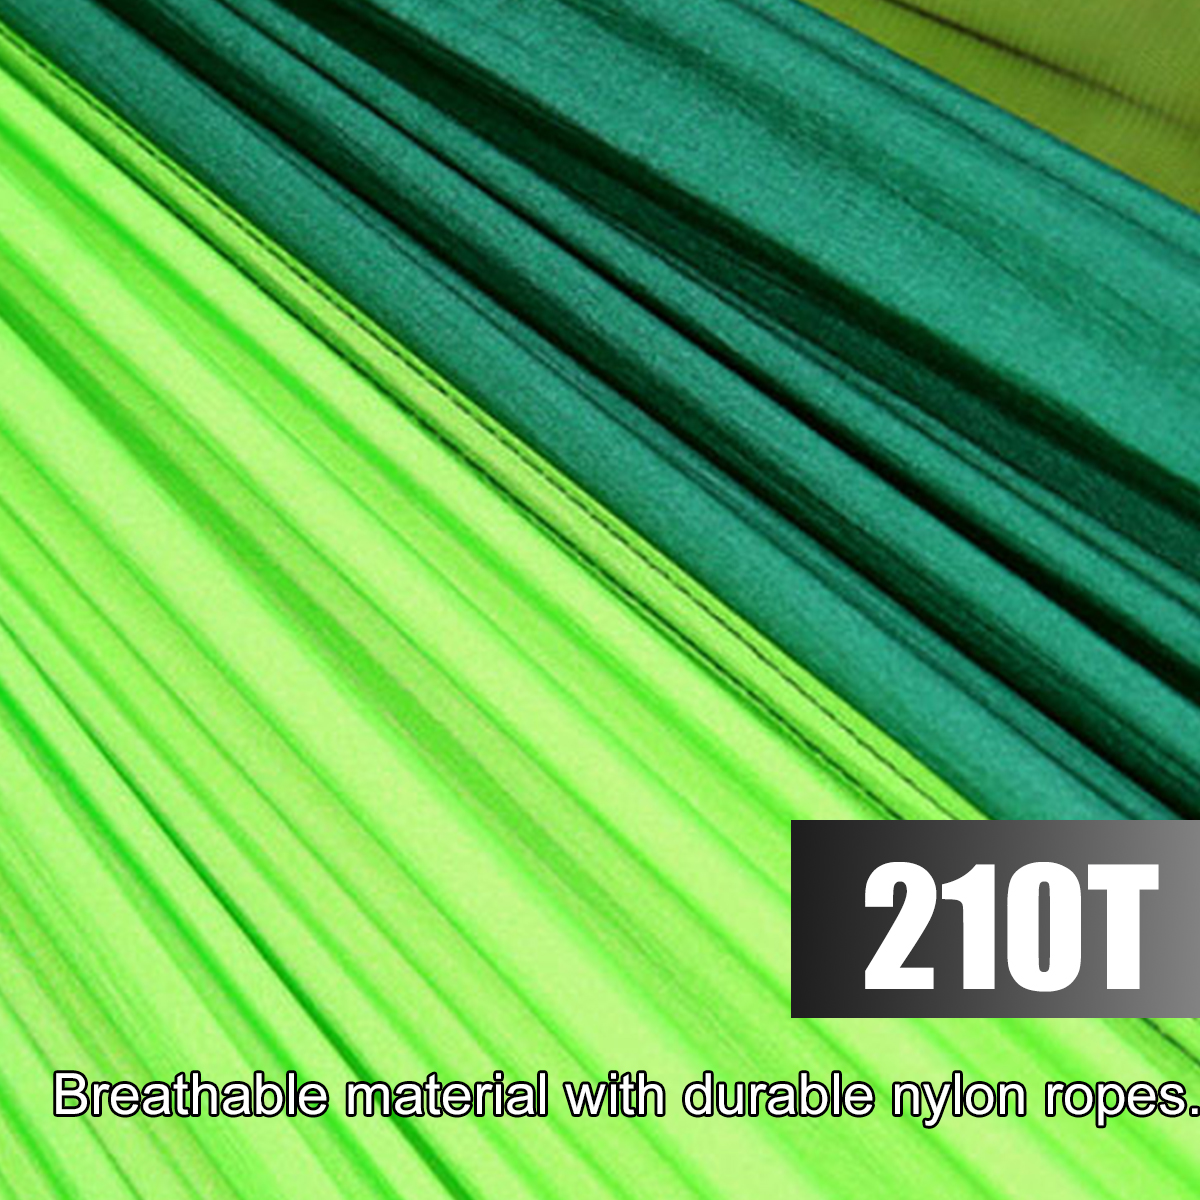 IPReereg-260140CM-With-Mosquito-Net-Portable-Travel-Hammock-Comfortable-Hommock-Camping-Bed-Fits-2-P-1726267-6